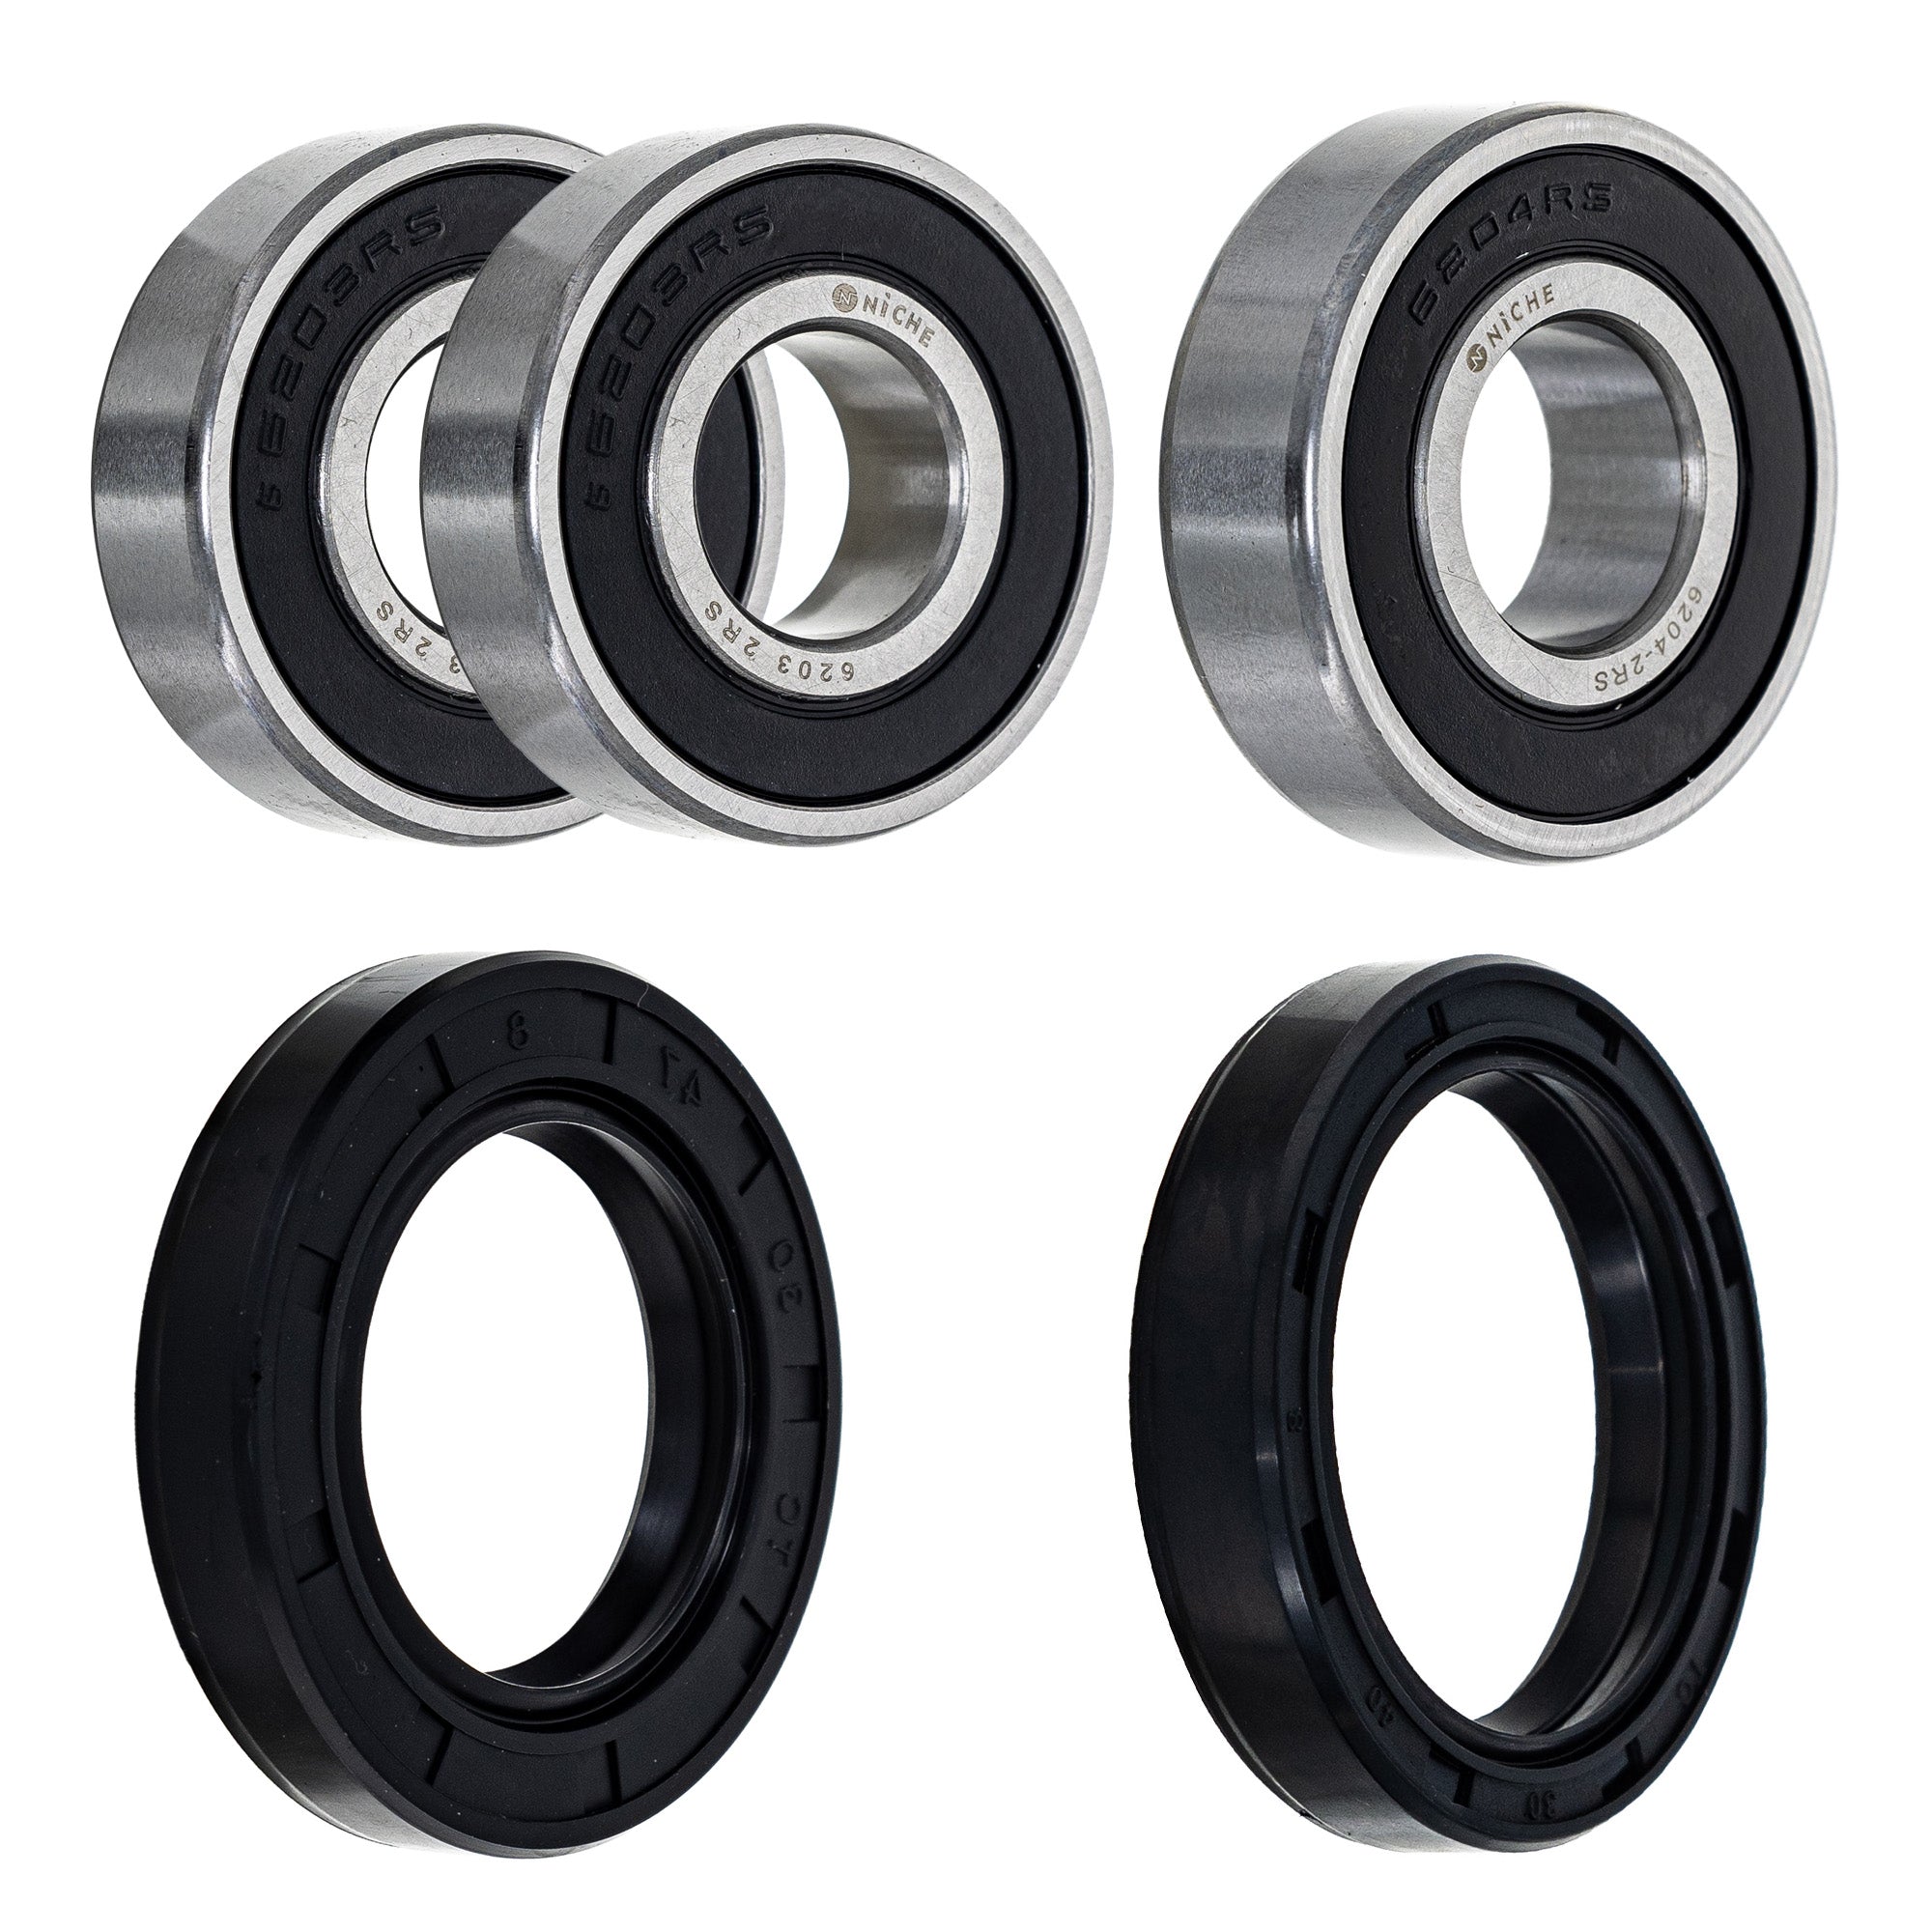 Wheel Bearing Seal Kit for zOTHER Ref No F650ST F650 NICHE MK1008885